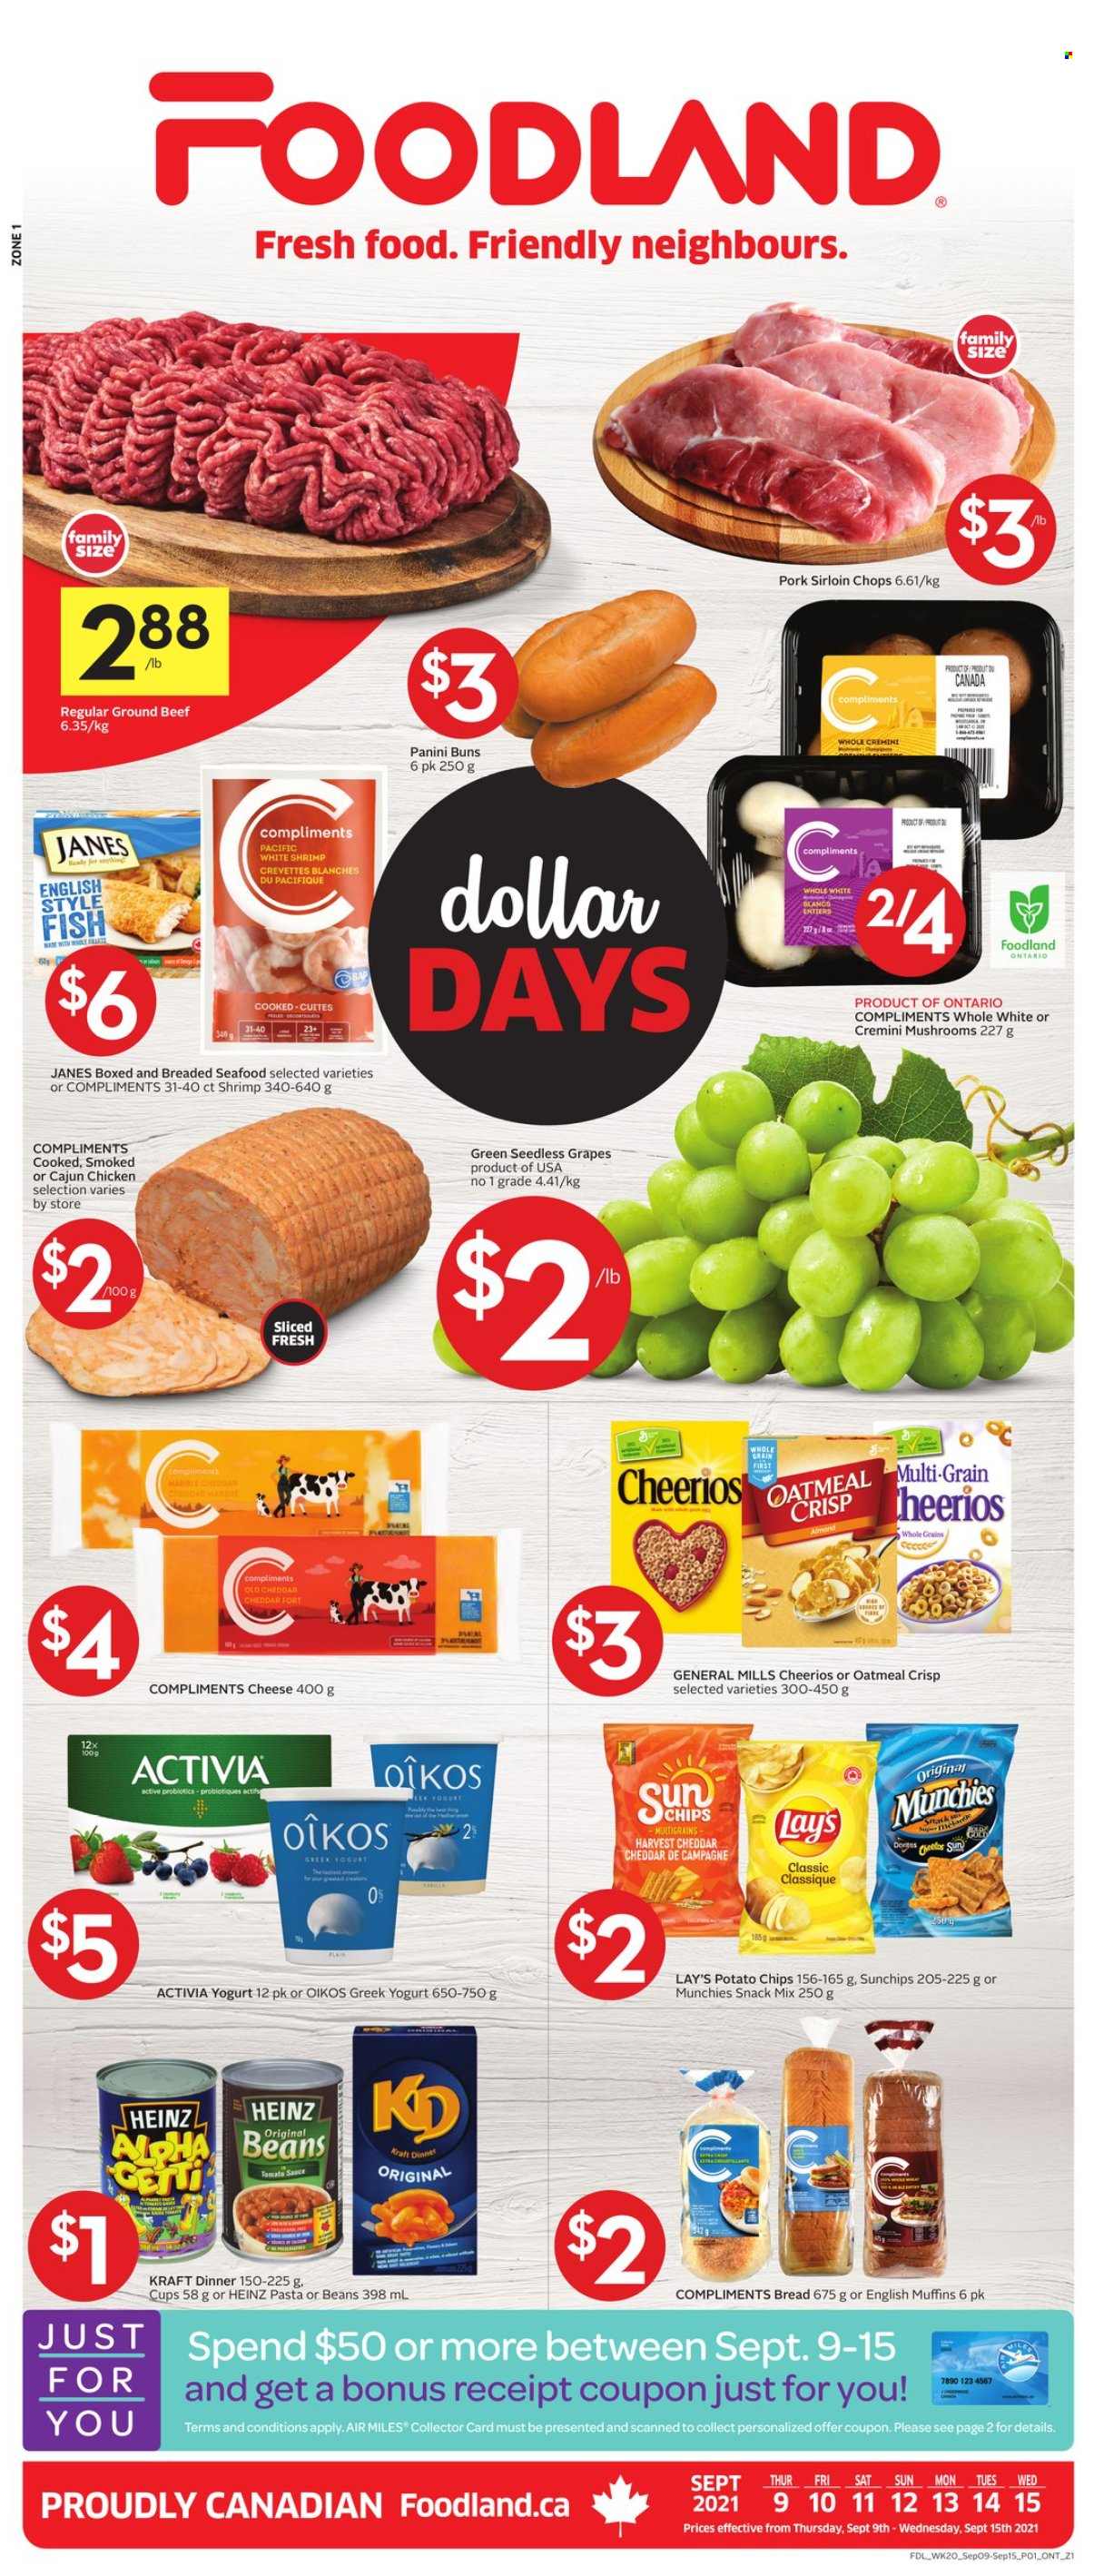 thumbnail - Foodland Flyer - September 09, 2021 - September 15, 2021 - Sales products - mushrooms, bread, english muffins, panini, buns, beans, grapes, seedless grapes, seafood, fish, shrimps, sauce, Kraft®, cheese, greek yoghurt, yoghurt, Activia, Oikos, snack, potato chips, Lay’s, oatmeal, Heinz, Cheerios, beef meat, ground beef, pork loin, probiotics, chips. Page 1.